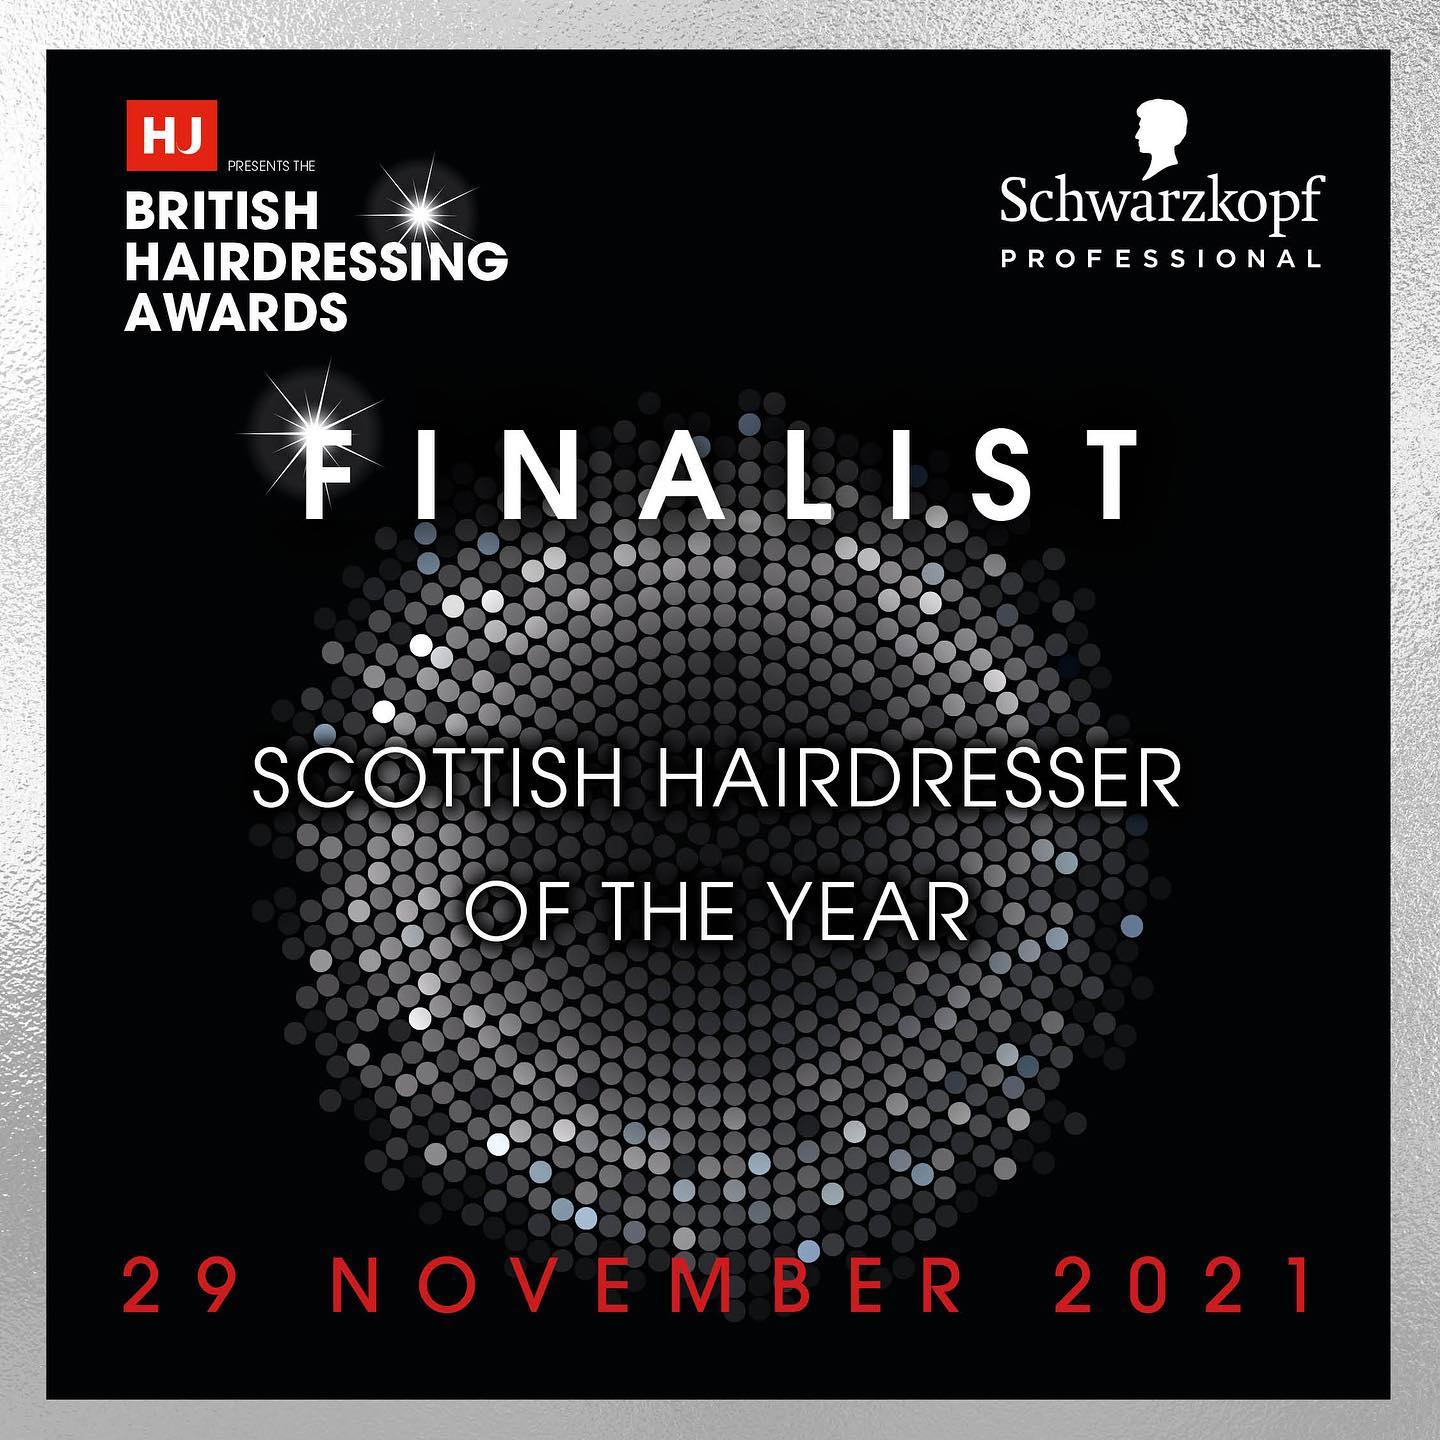 We Are Scottish Hairdresser of the Year Finalists